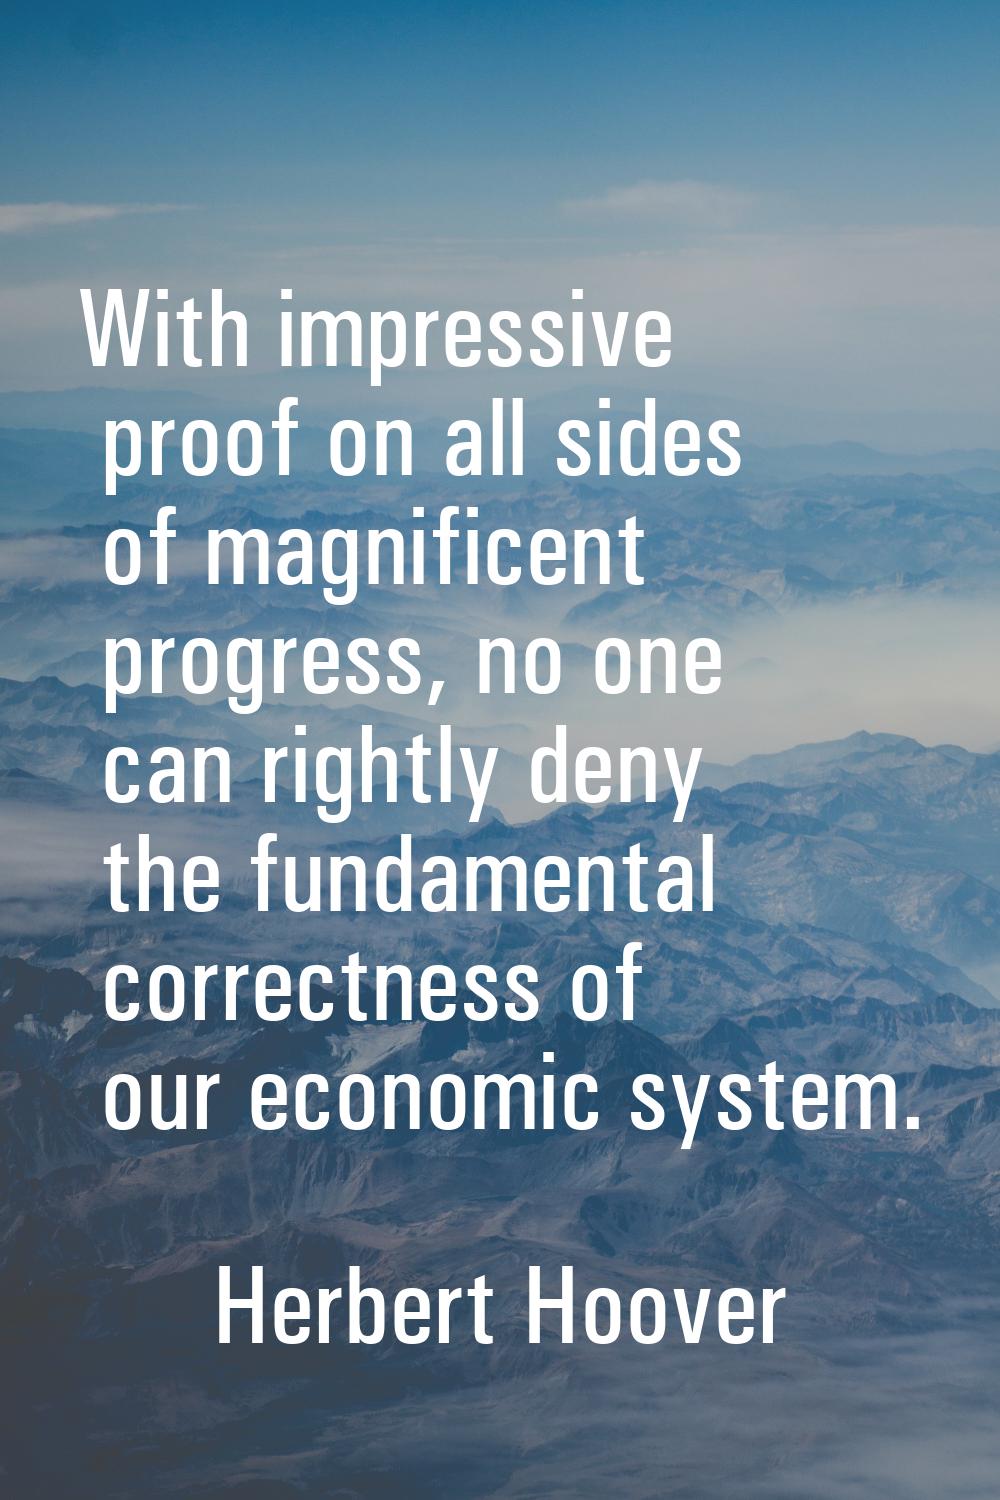 With impressive proof on all sides of magnificent progress, no one can rightly deny the fundamental